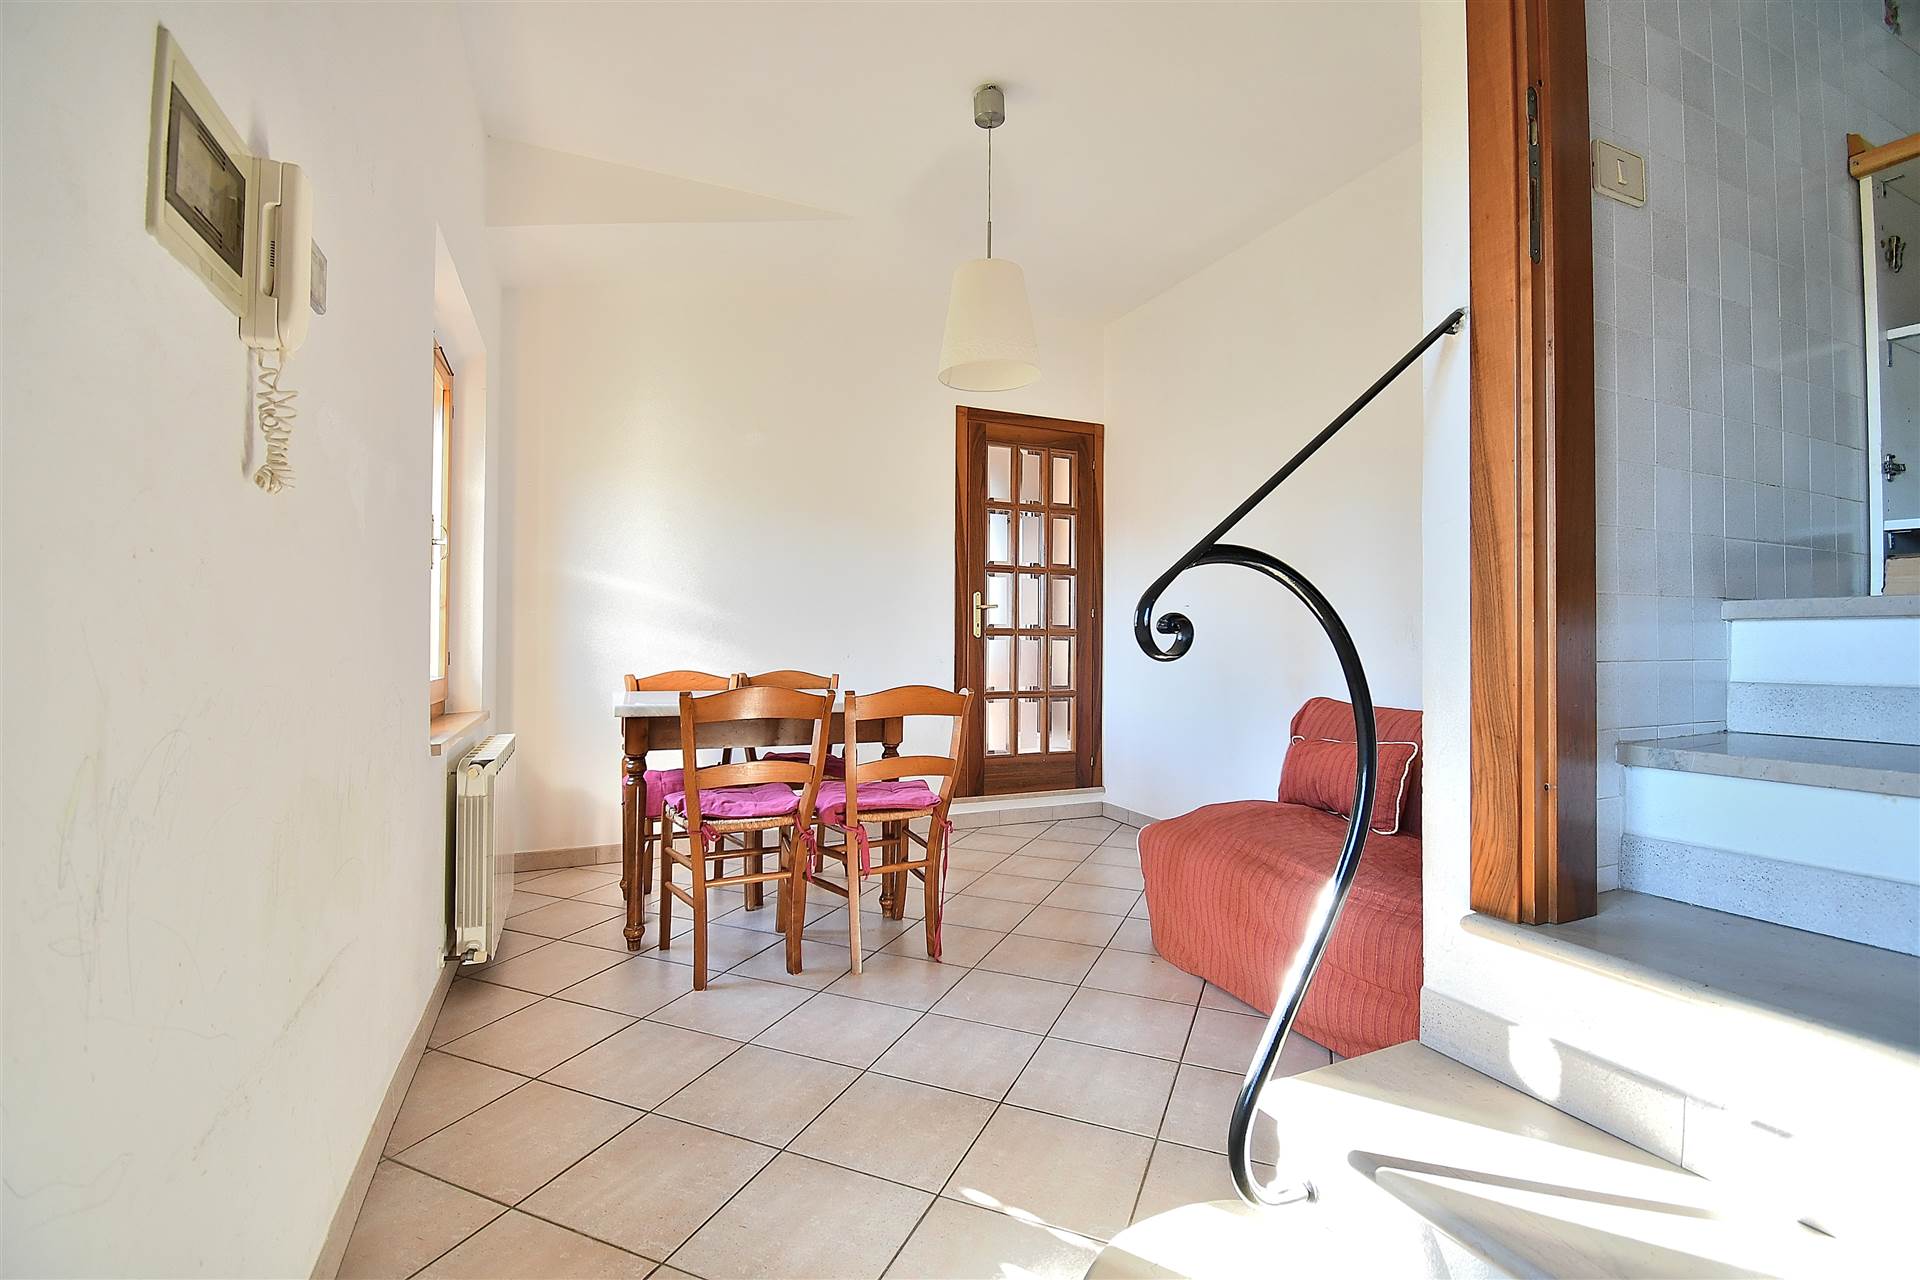 LUCIGNANO D'ARBIA, MONTERONI D'ARBIA, Apartment for sale of 51 Sq. mt., Good condition, Heating Individual heating system, Energetic class: G, Epi: 